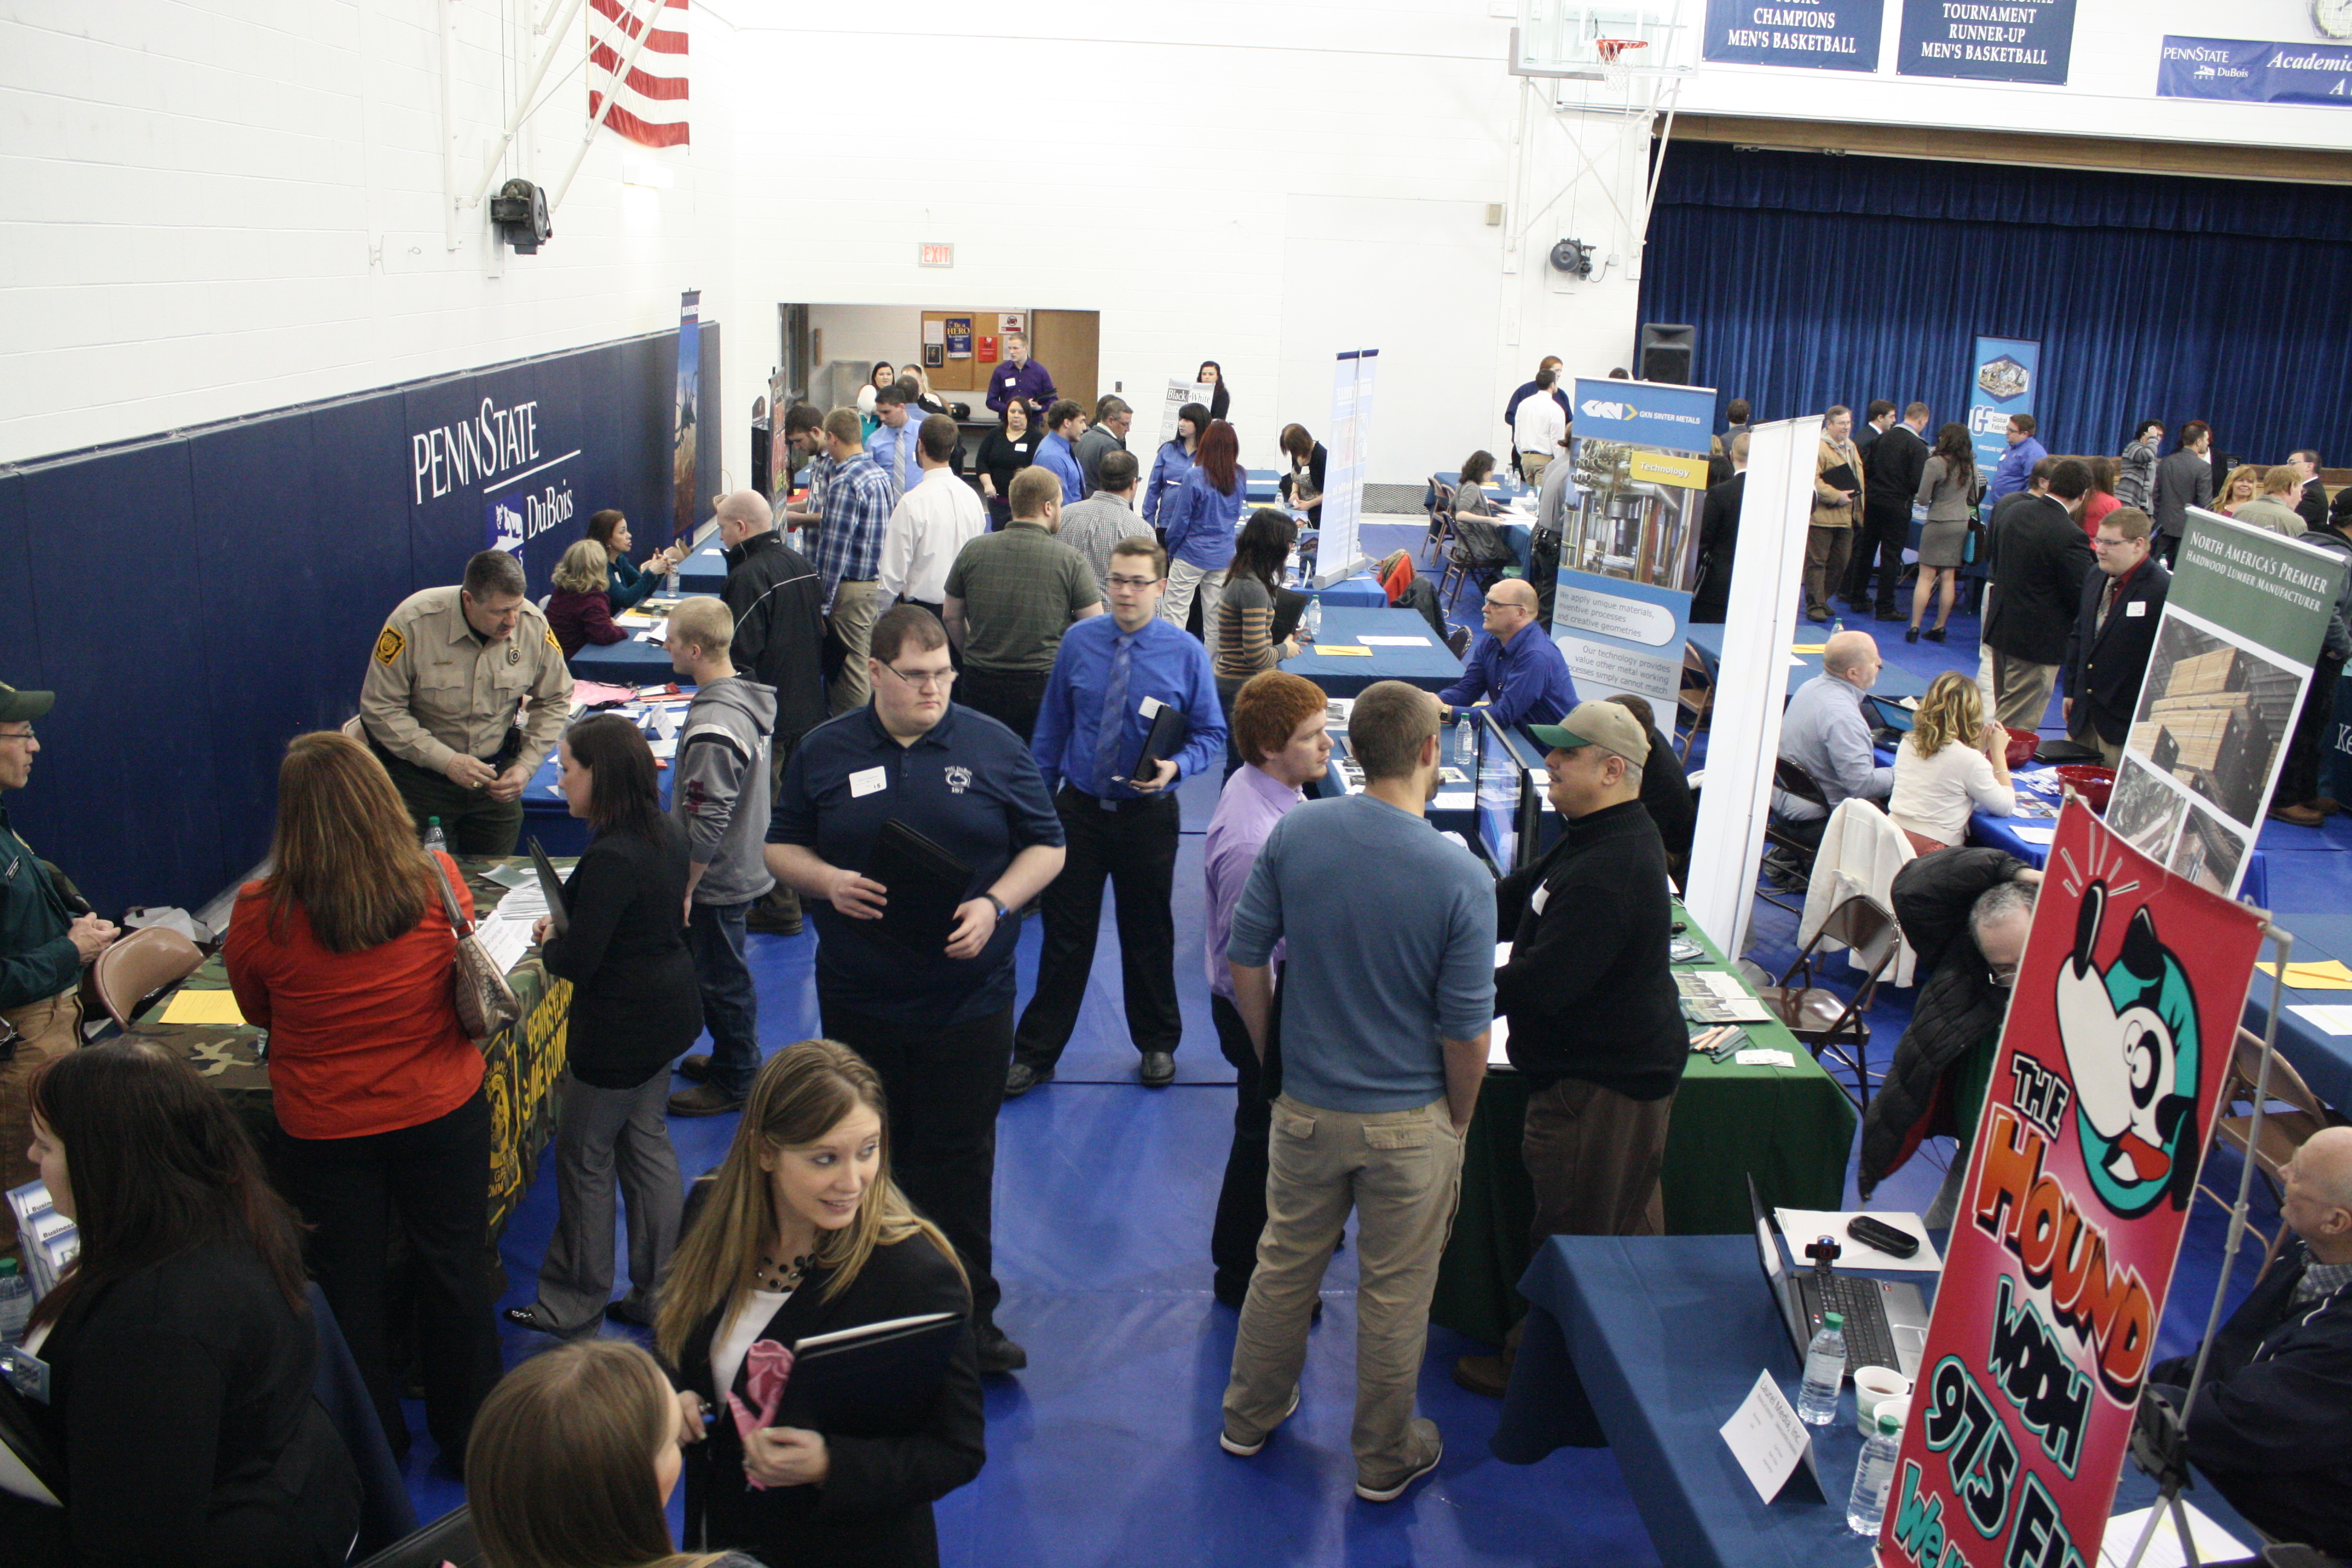 Job seekers learn about career opportunities from local industry representatives at the Penn State DuBois Career Fair in the campus gymnasium. (Provided photo)